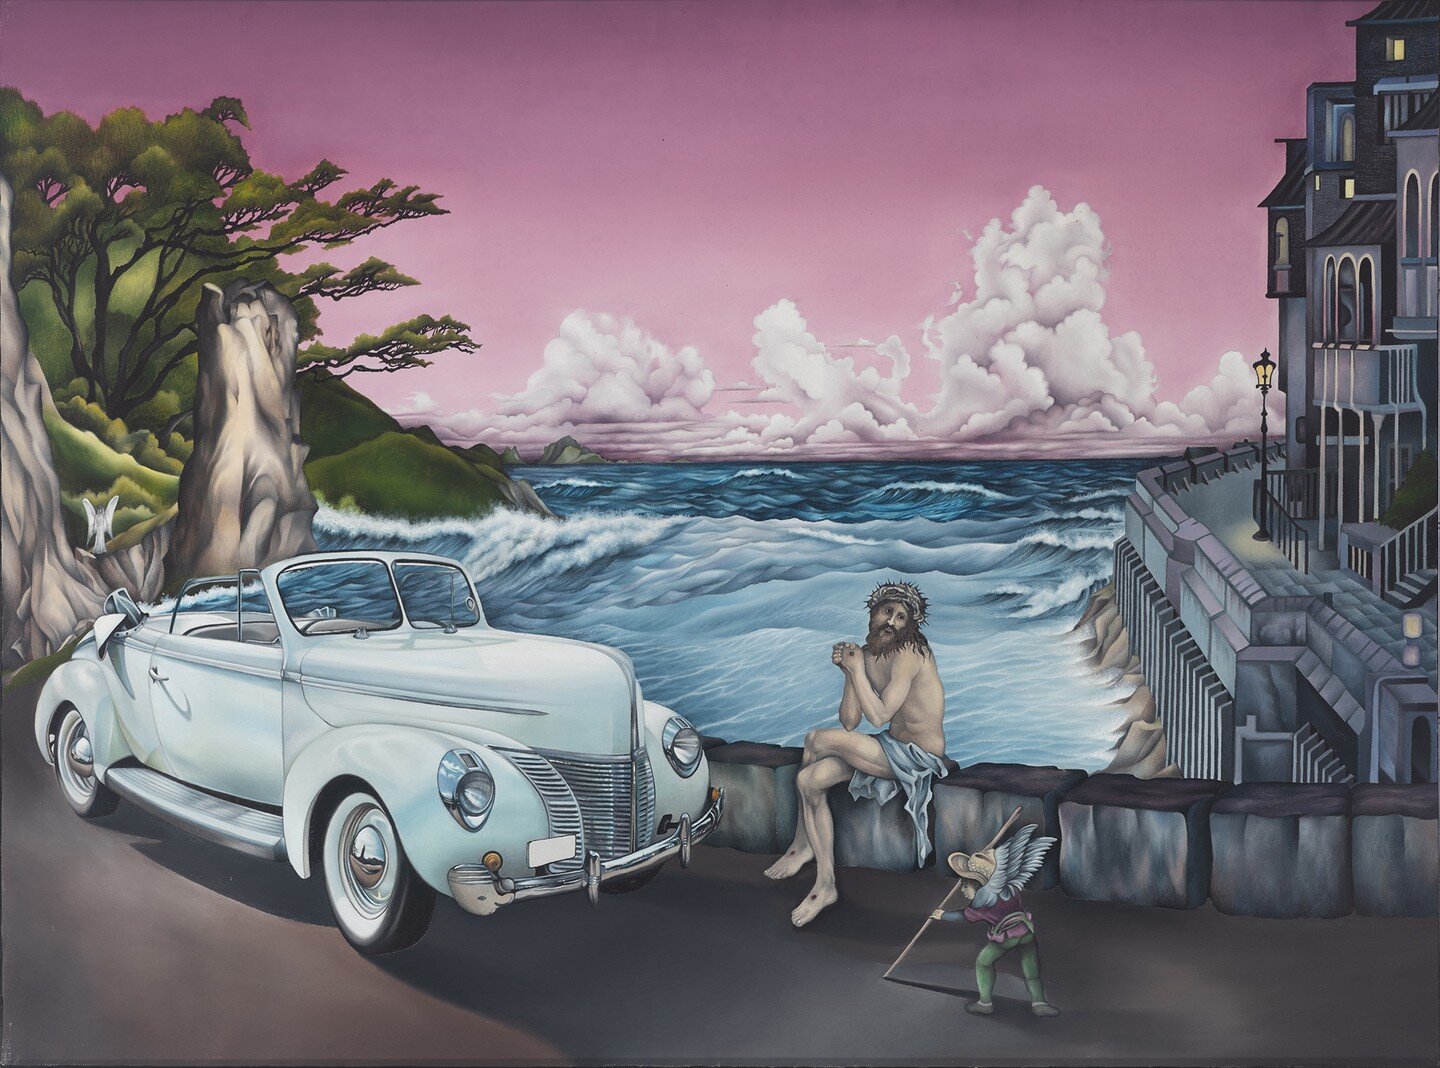 Seaside Sacrifice
Oil on Canvas
3ft. x 2ft.

#classicalpainting #oilpainting #religeousicons #classiccars #seasidegetaway #surrealisicpainting #renaisanncepainting #insurancepolicy